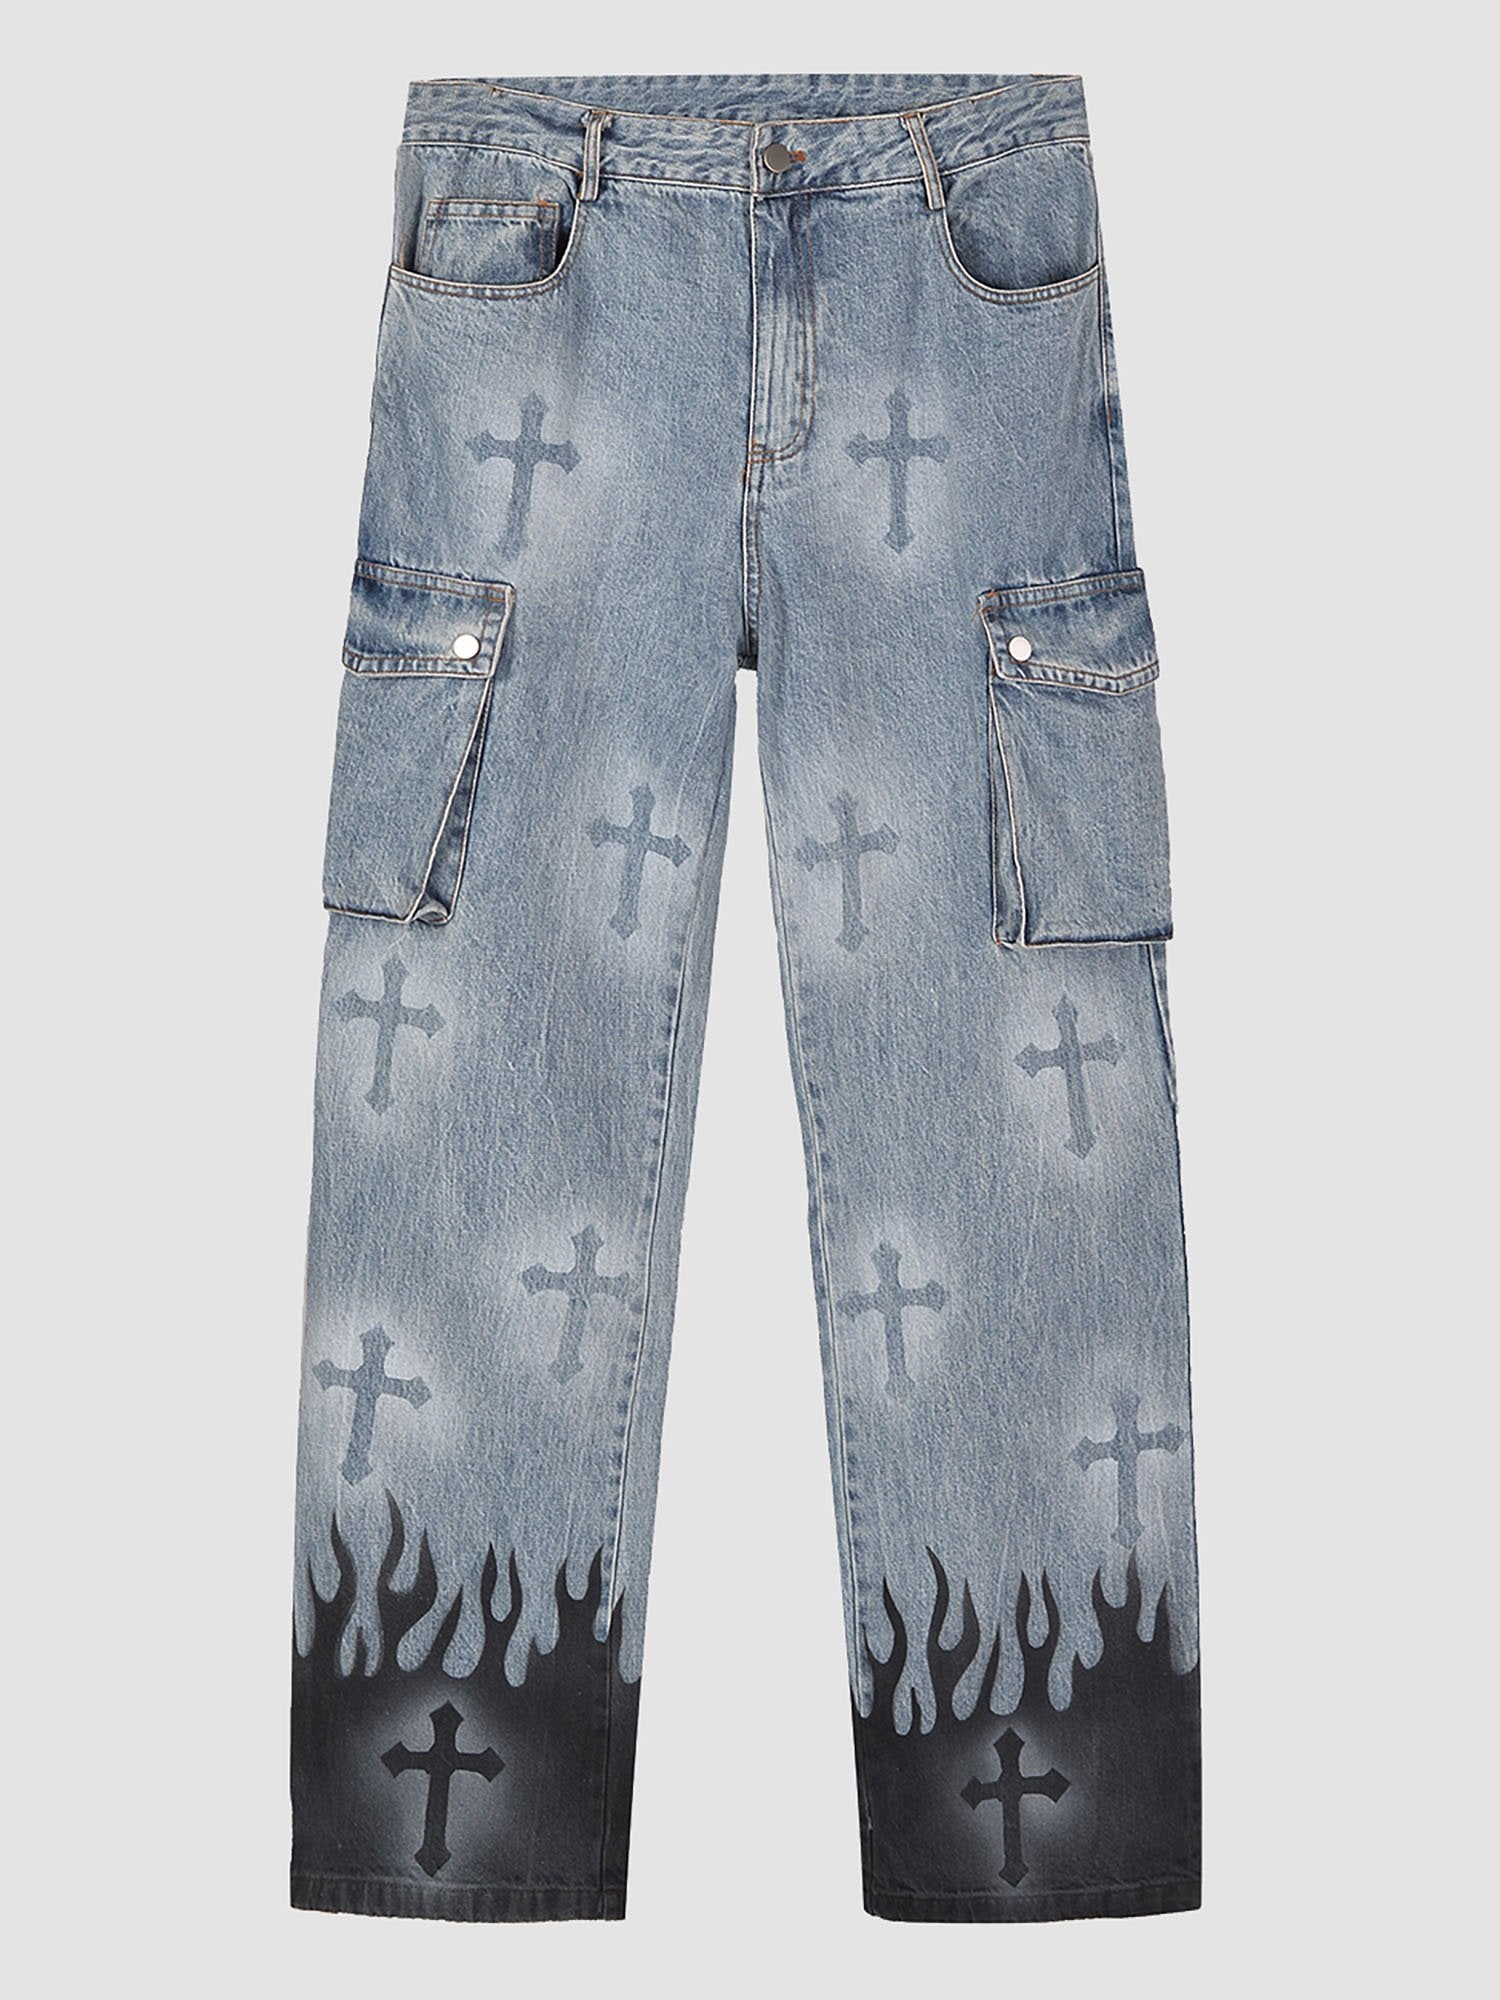 JUSTNOTAG Multi Pockets Flame Cross Color Block Jeans